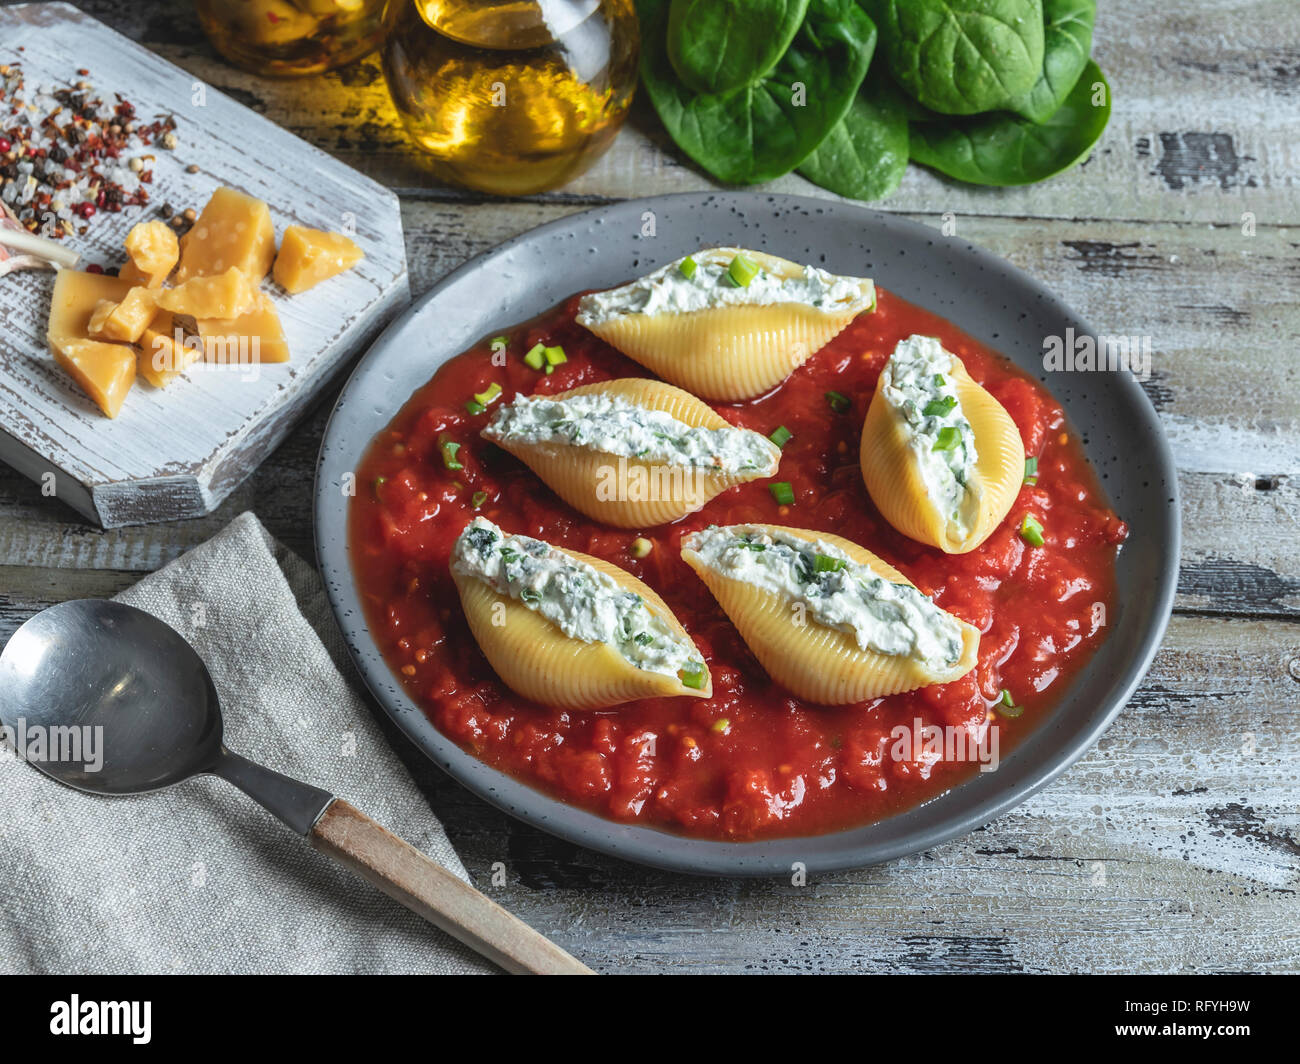 cooked pasta conchiglioni stuffed spinach and cheese, tomato sauce on plate Stock Photo